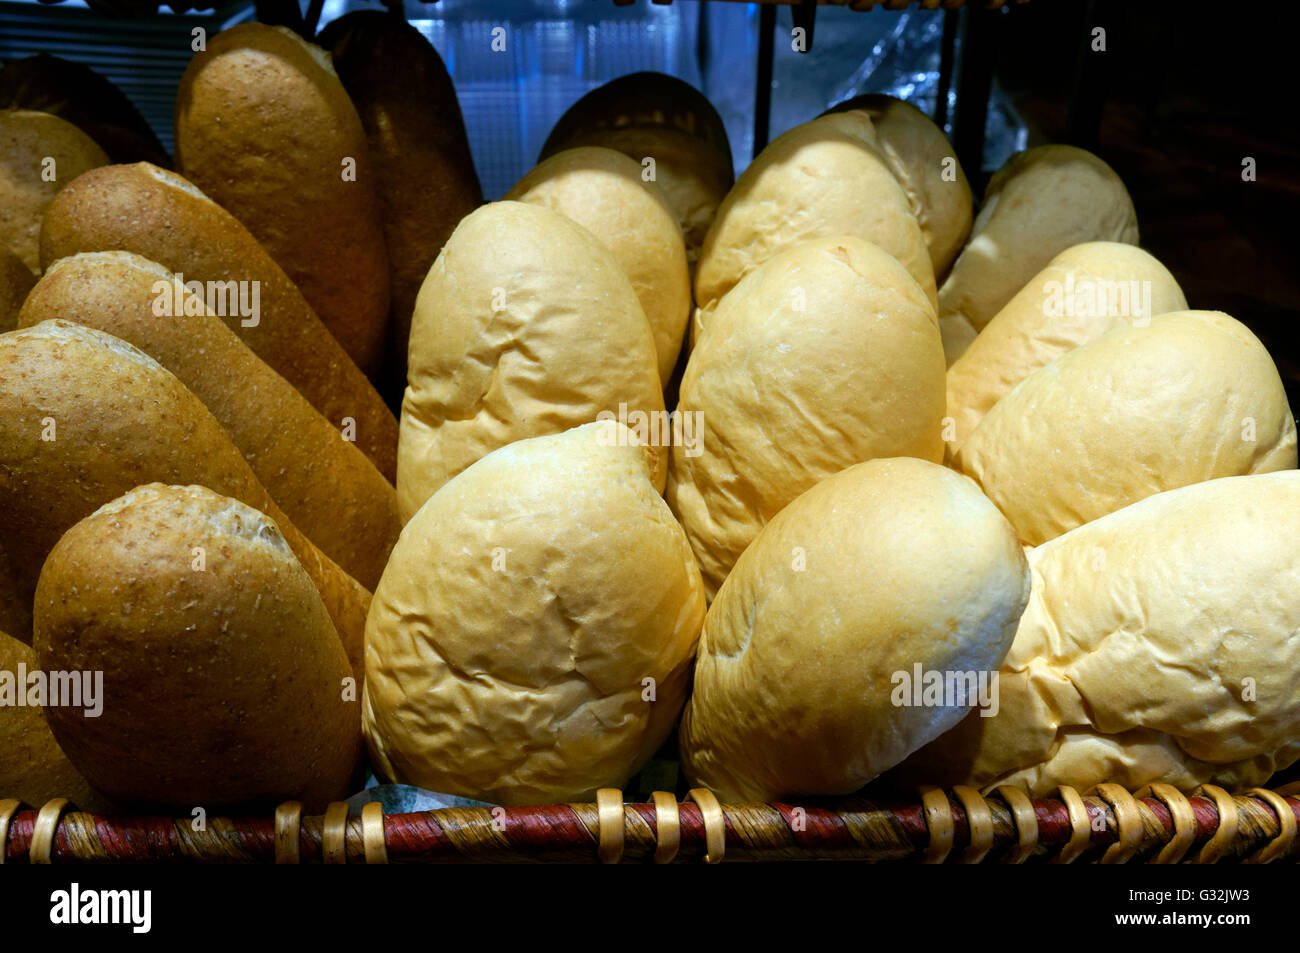 A basket of brown and white panini bread rolls Stock Photo